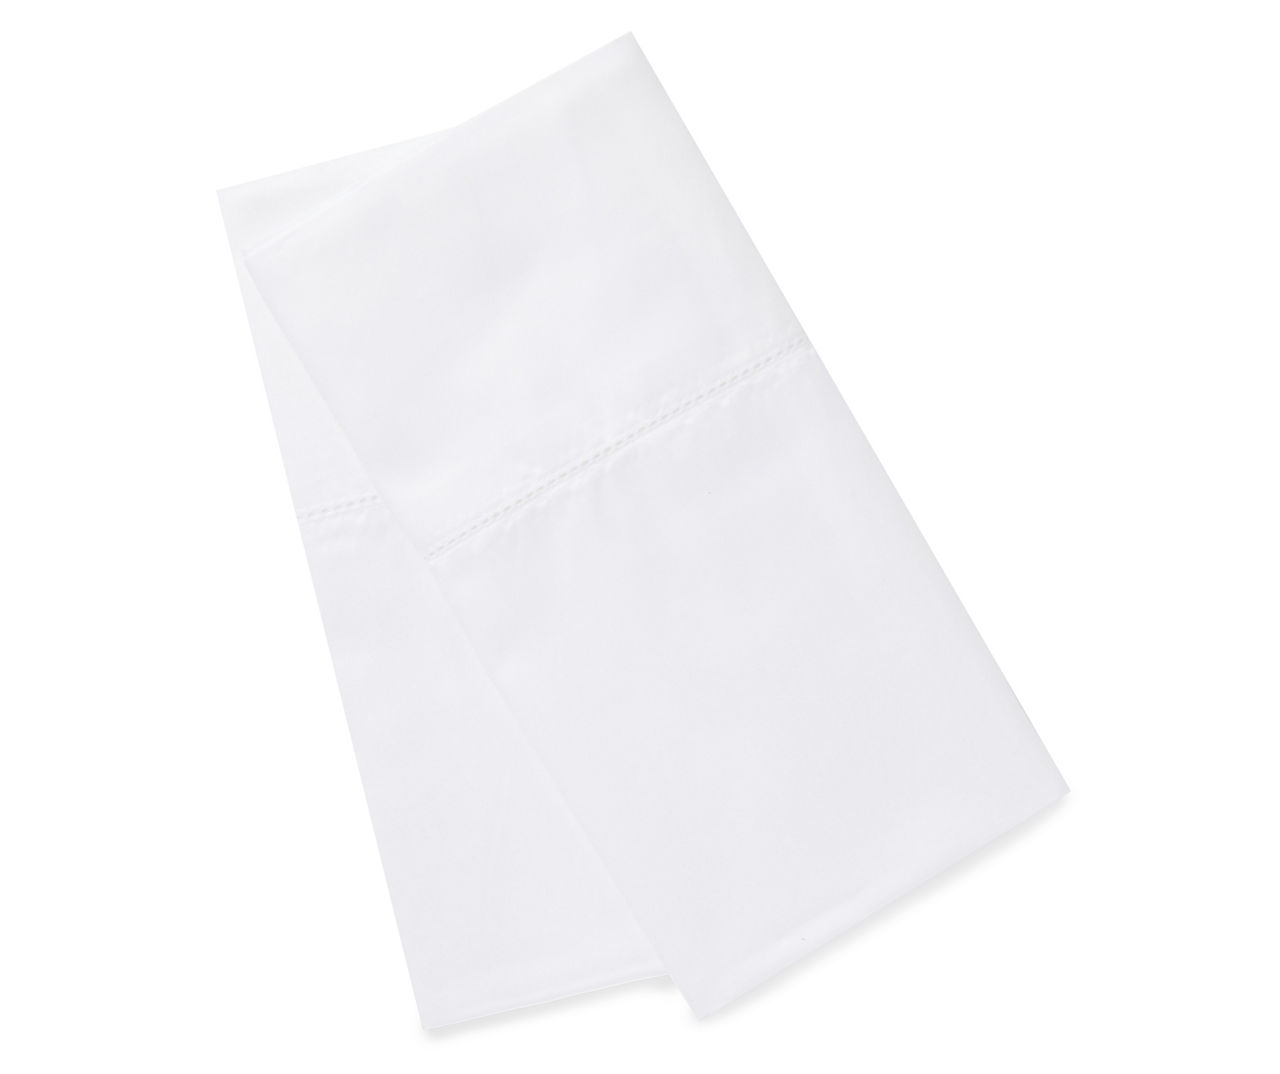 Brilliant White 400 Thread Count King Pillowcases, 2-Pack